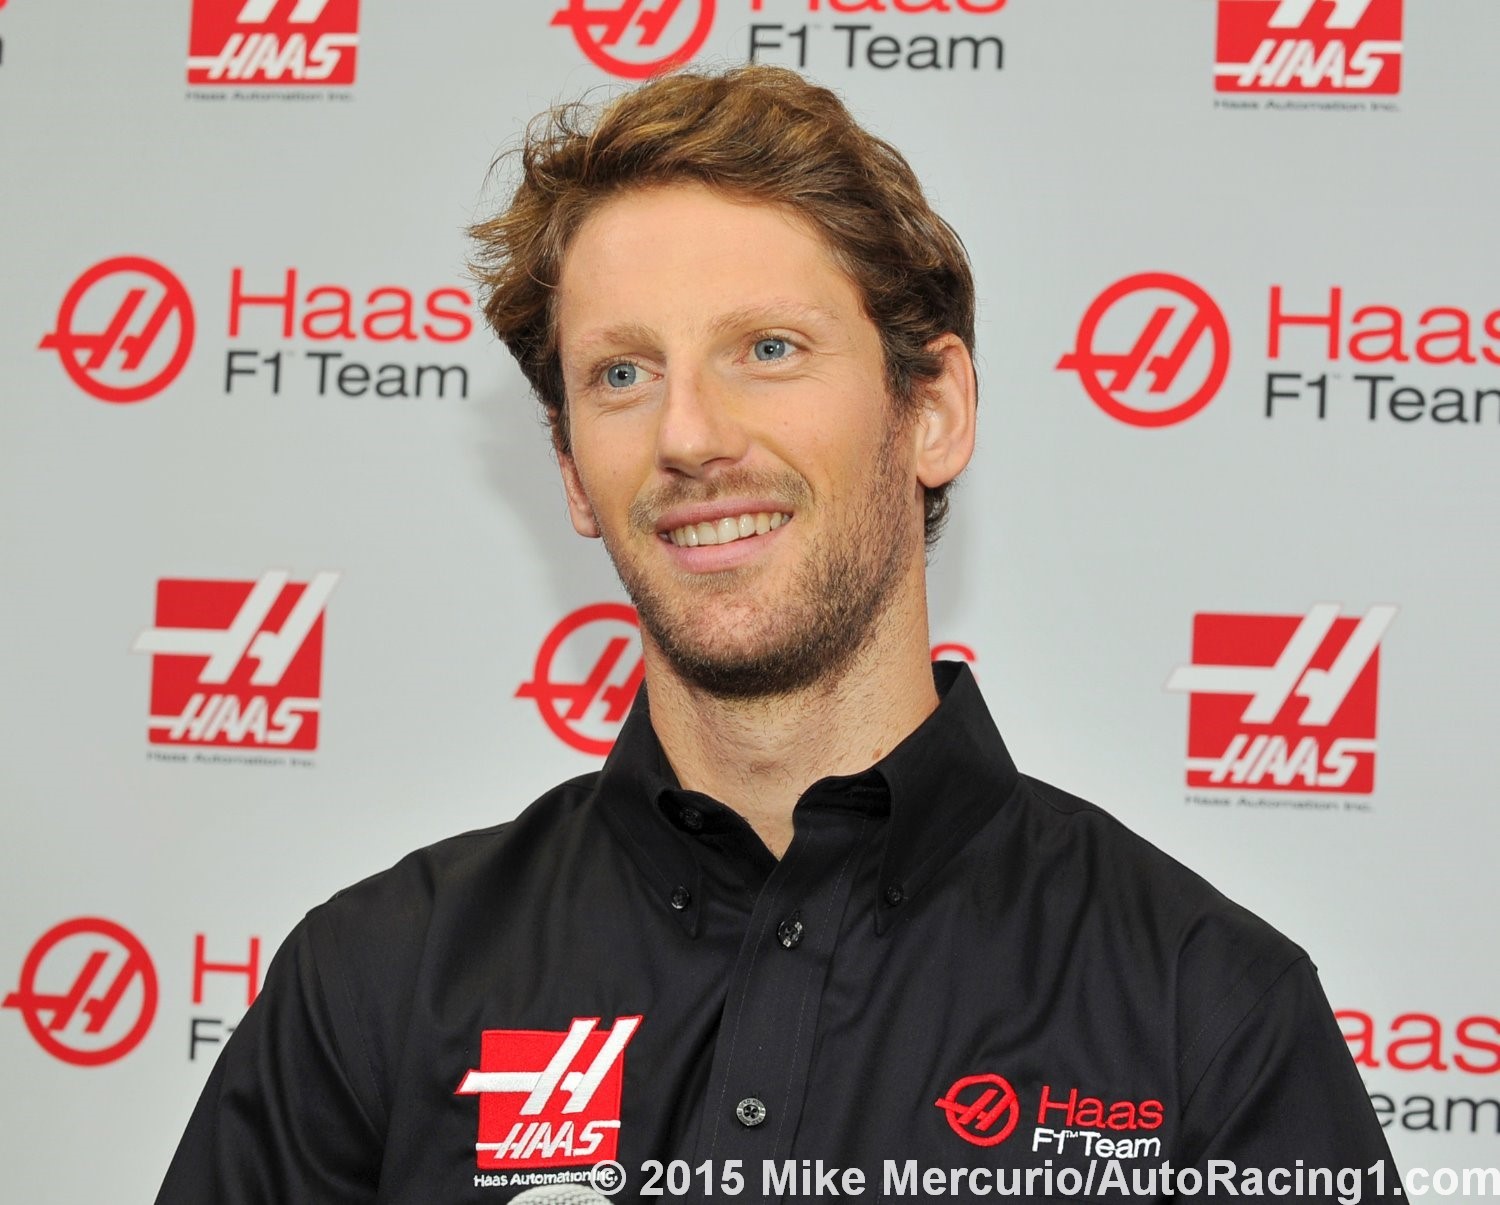 Grosjean has been getting mopped up by Magnussen this year. Ferrari won't take him